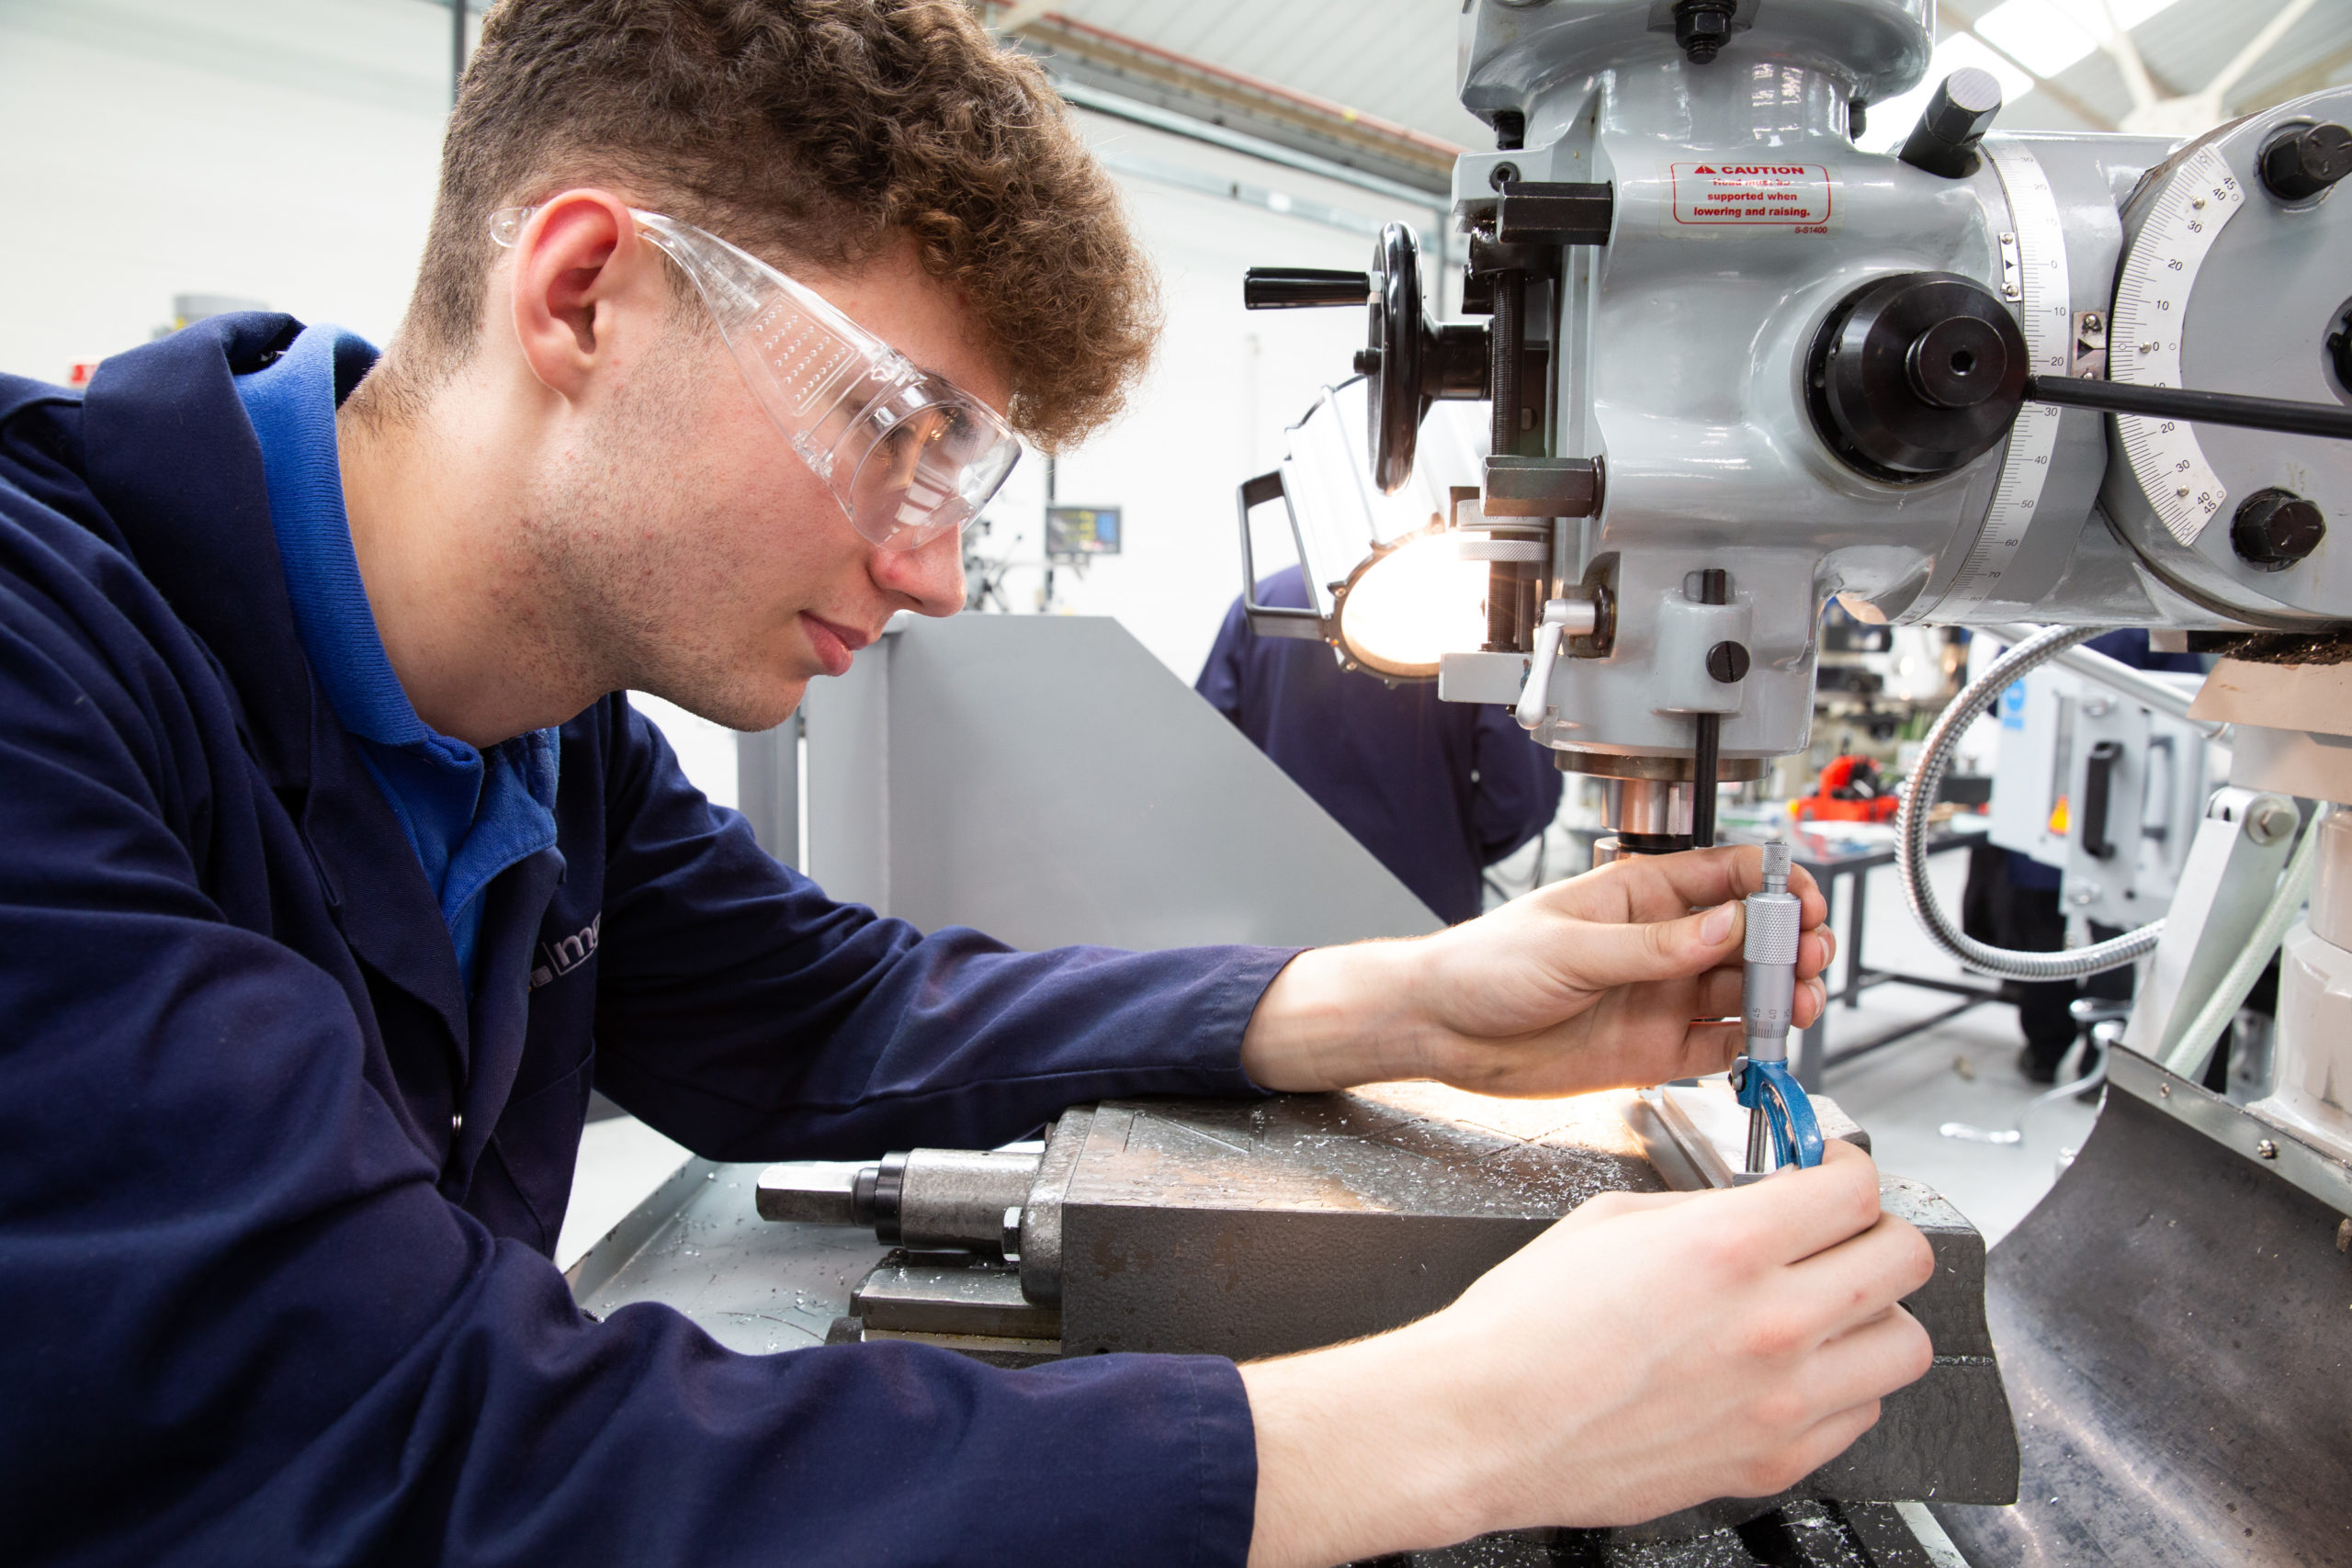 Toolmaker and Tool & Die Maintenance Technician apprentice inspecting a machined component